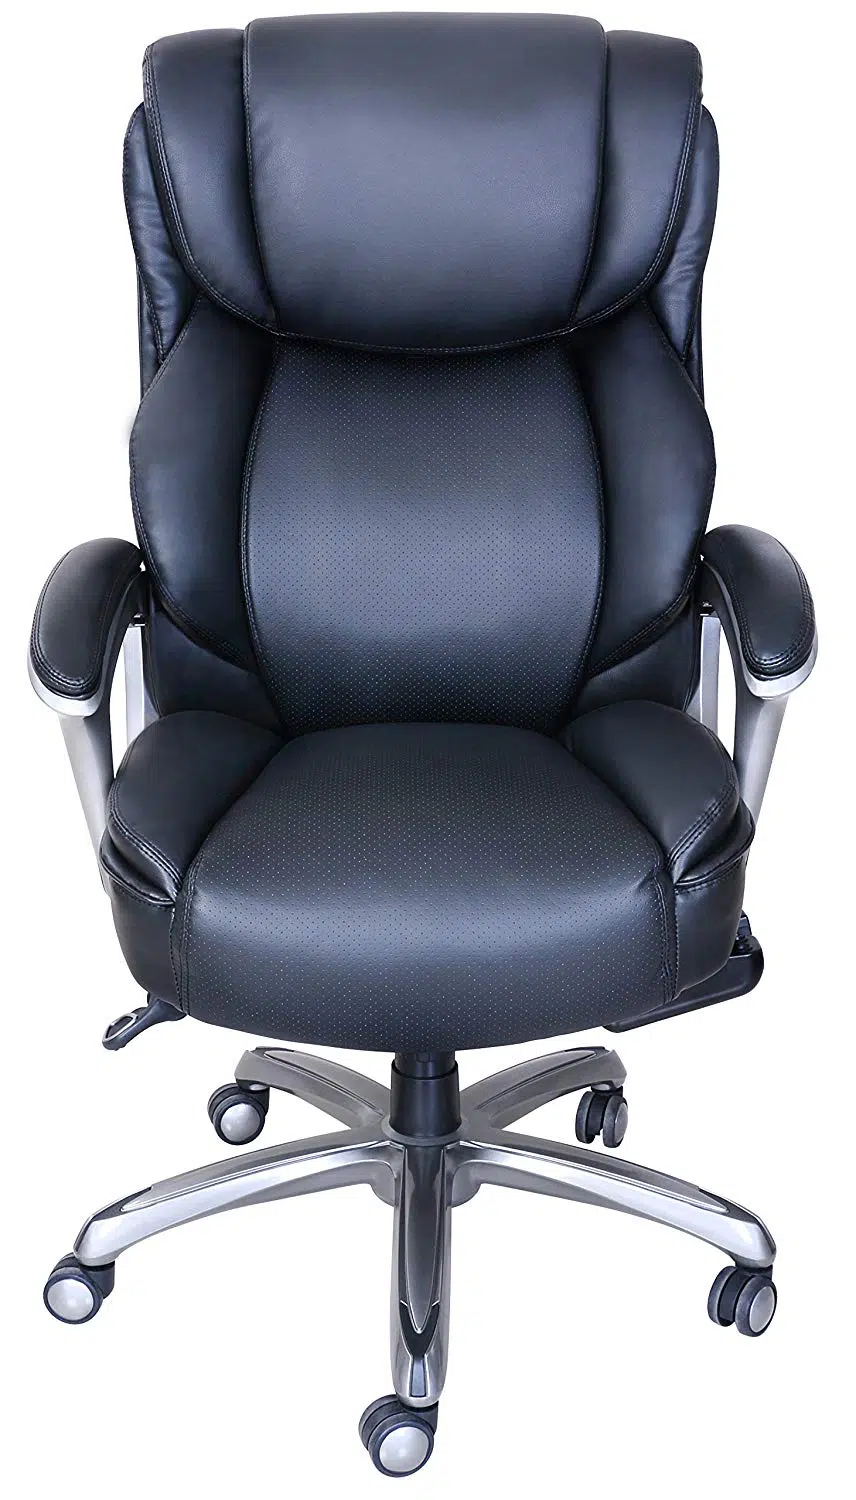 Gentherm-heated-cooled-office-chair